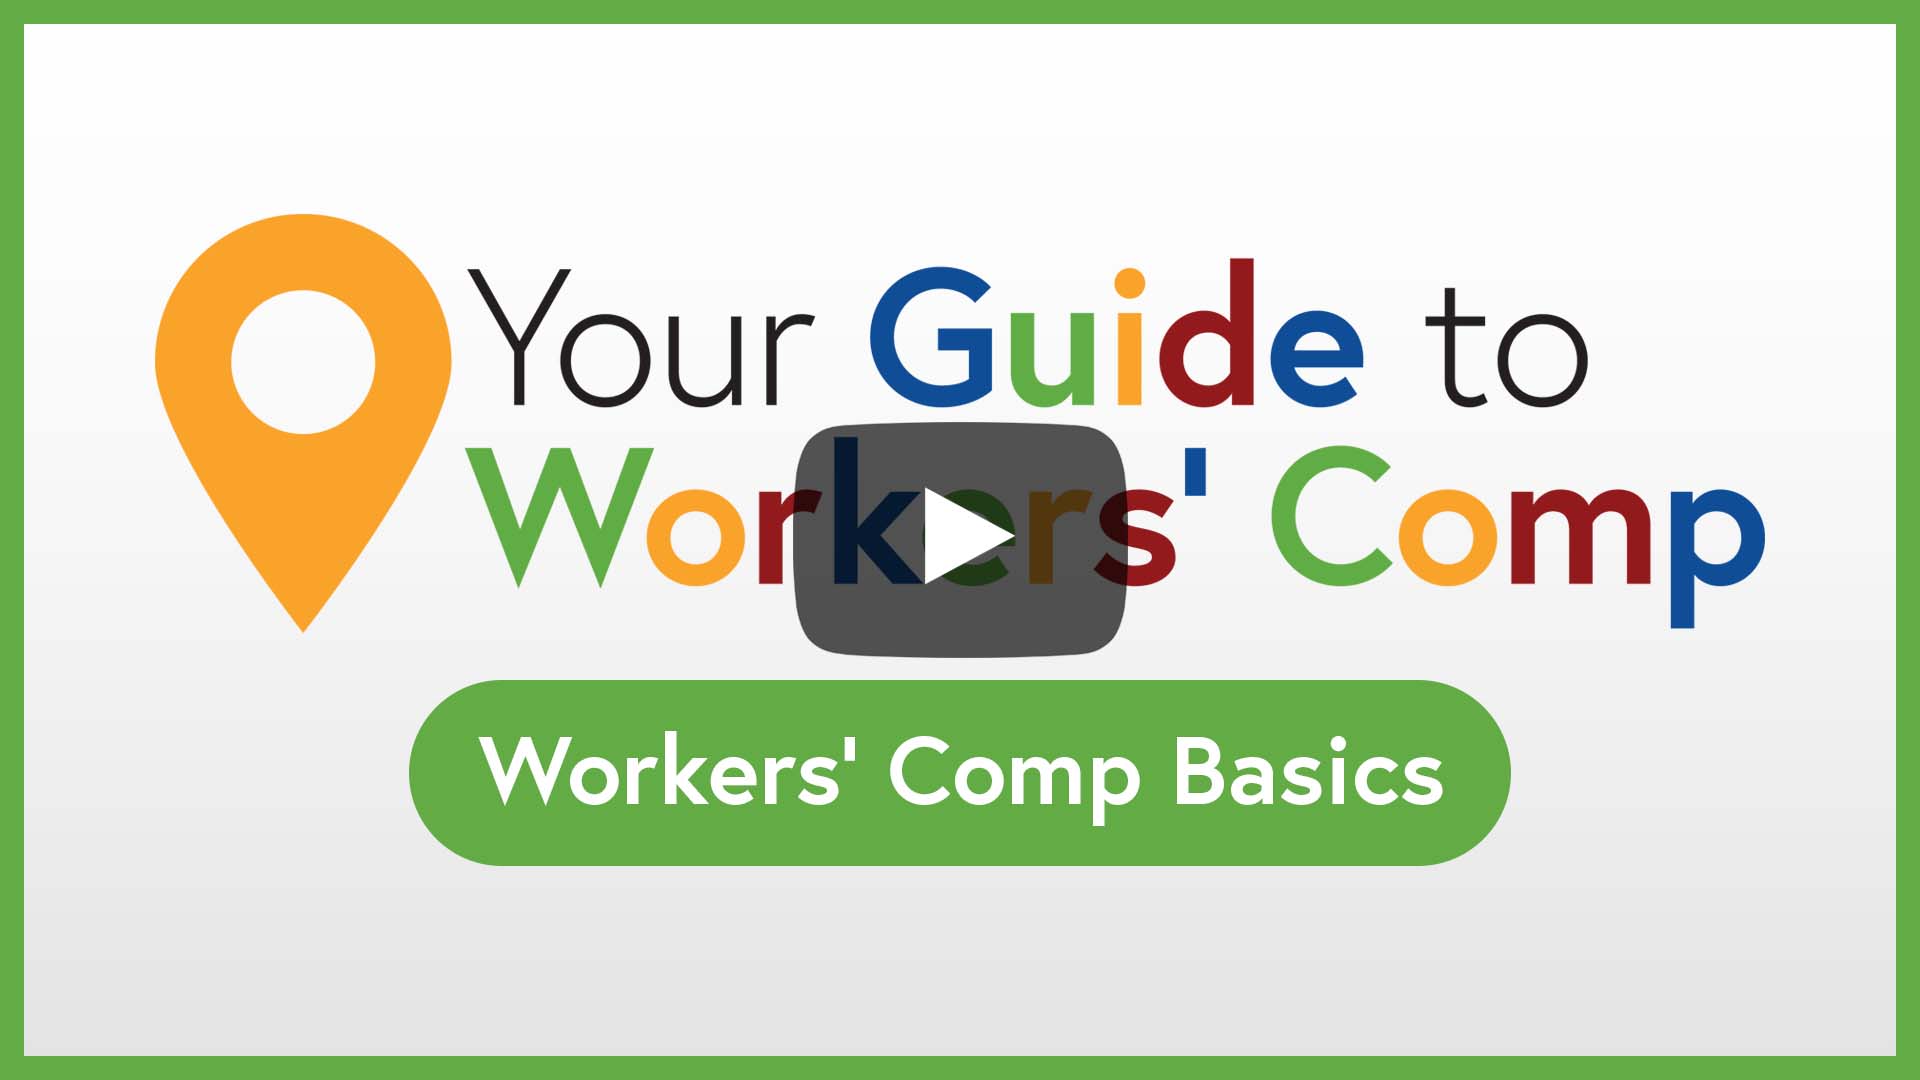 Your Guide to Workers' Comp - Workers' Comp Basics